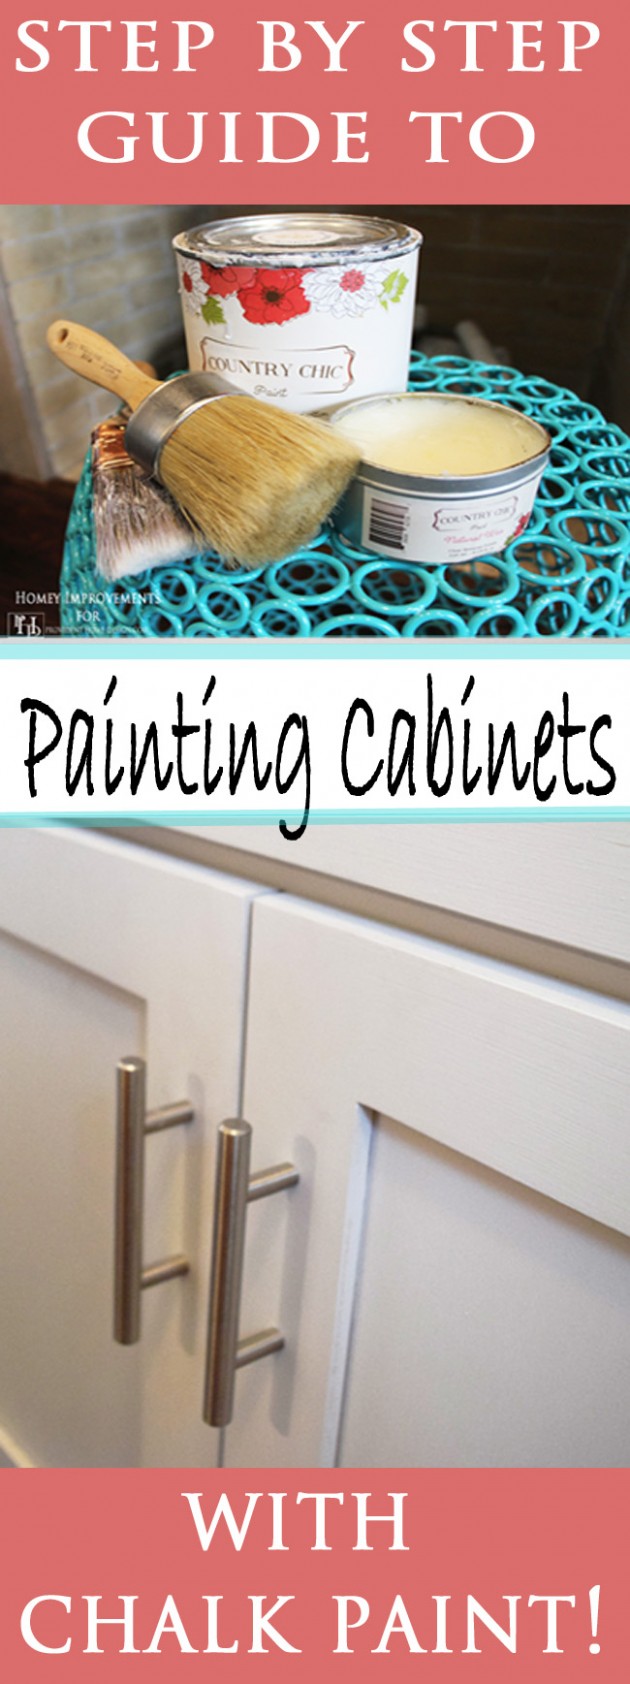 How To Paint Cabinets With Chalk Paint Can You Chalk Paint Metal Cabinets